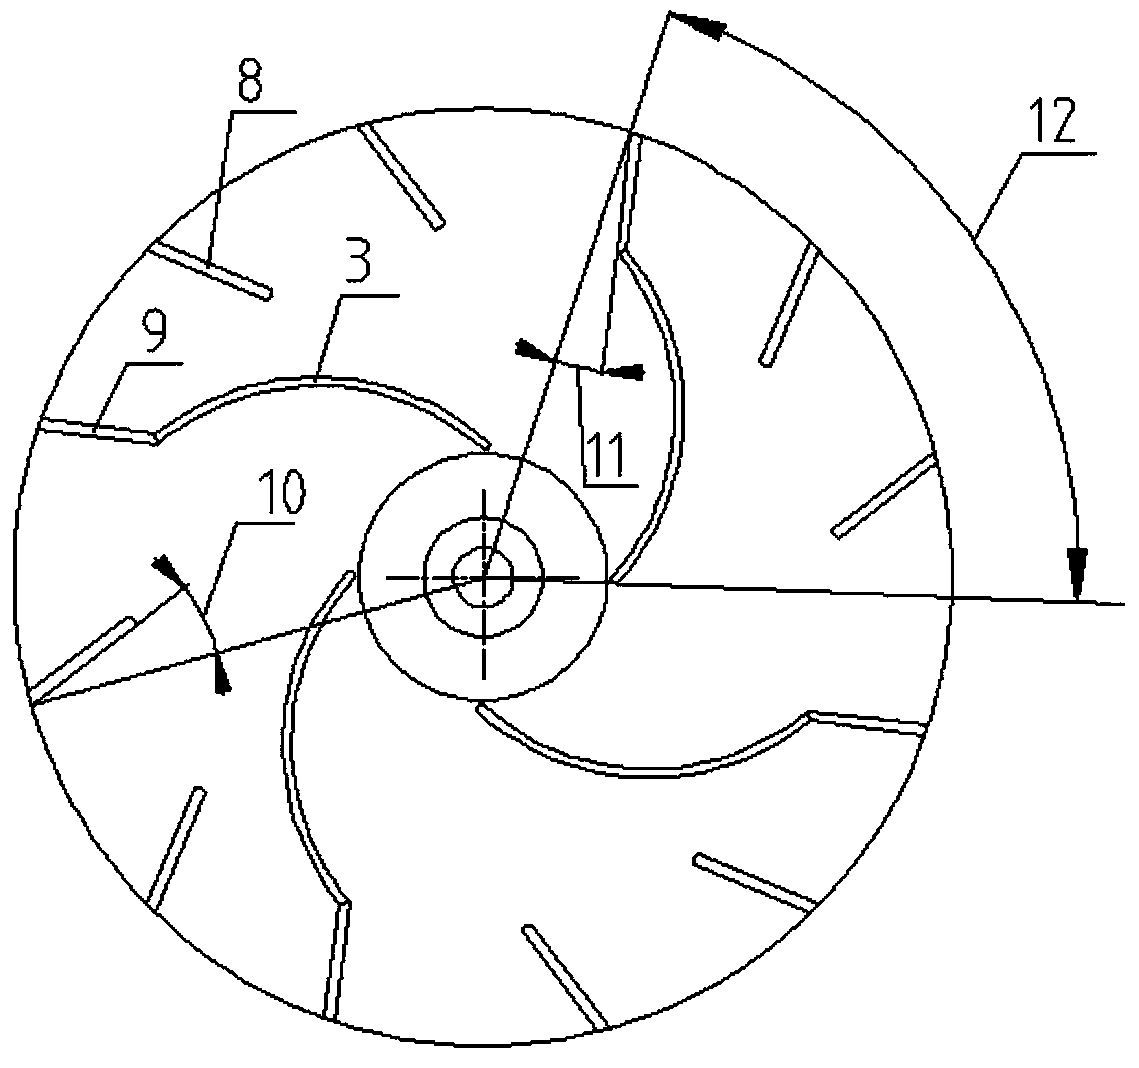 Combined type method for designing variable-camber low-specific-speed centrifugal pump impeller